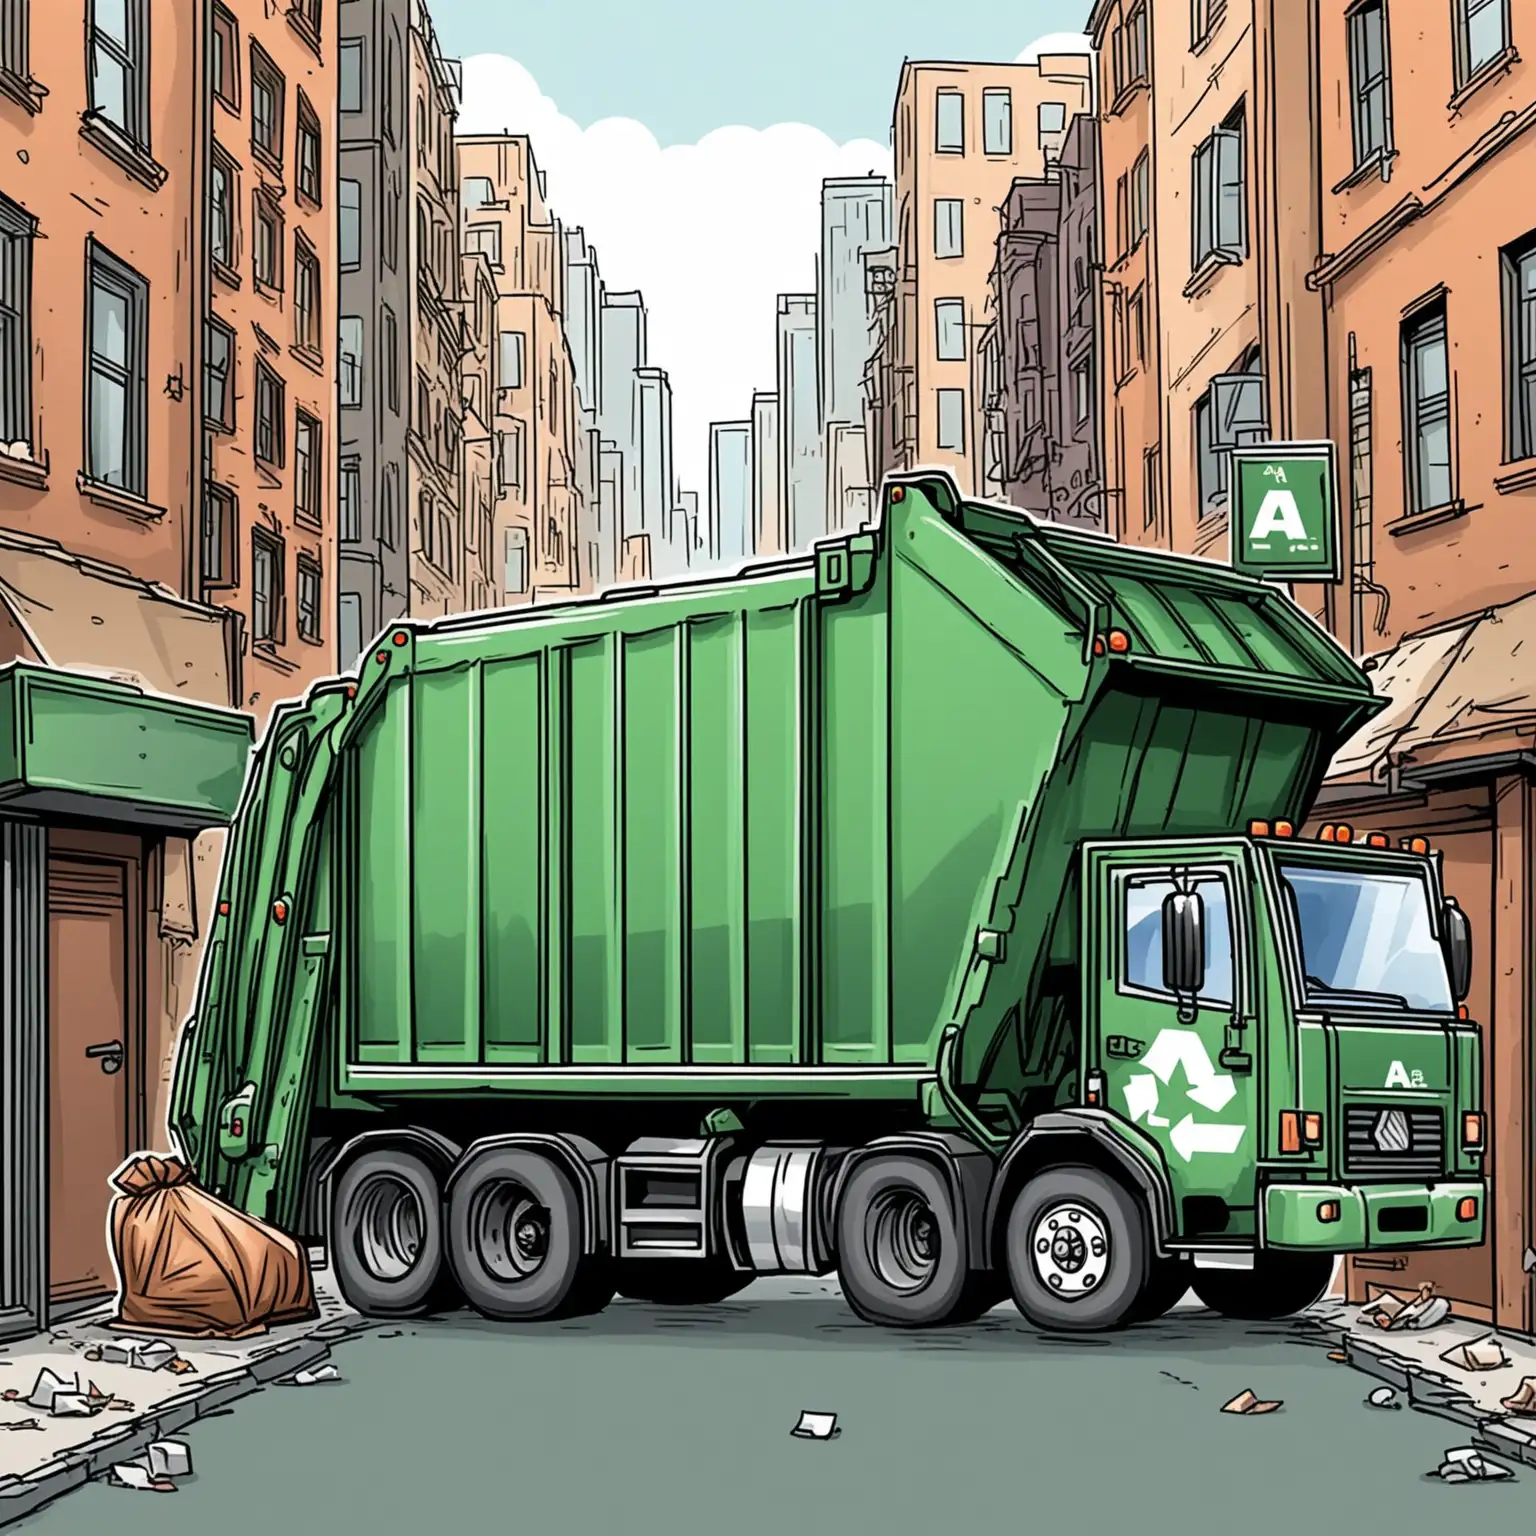 Draw a cartoon image of a a garbage truck driving in the backstreets of a big city